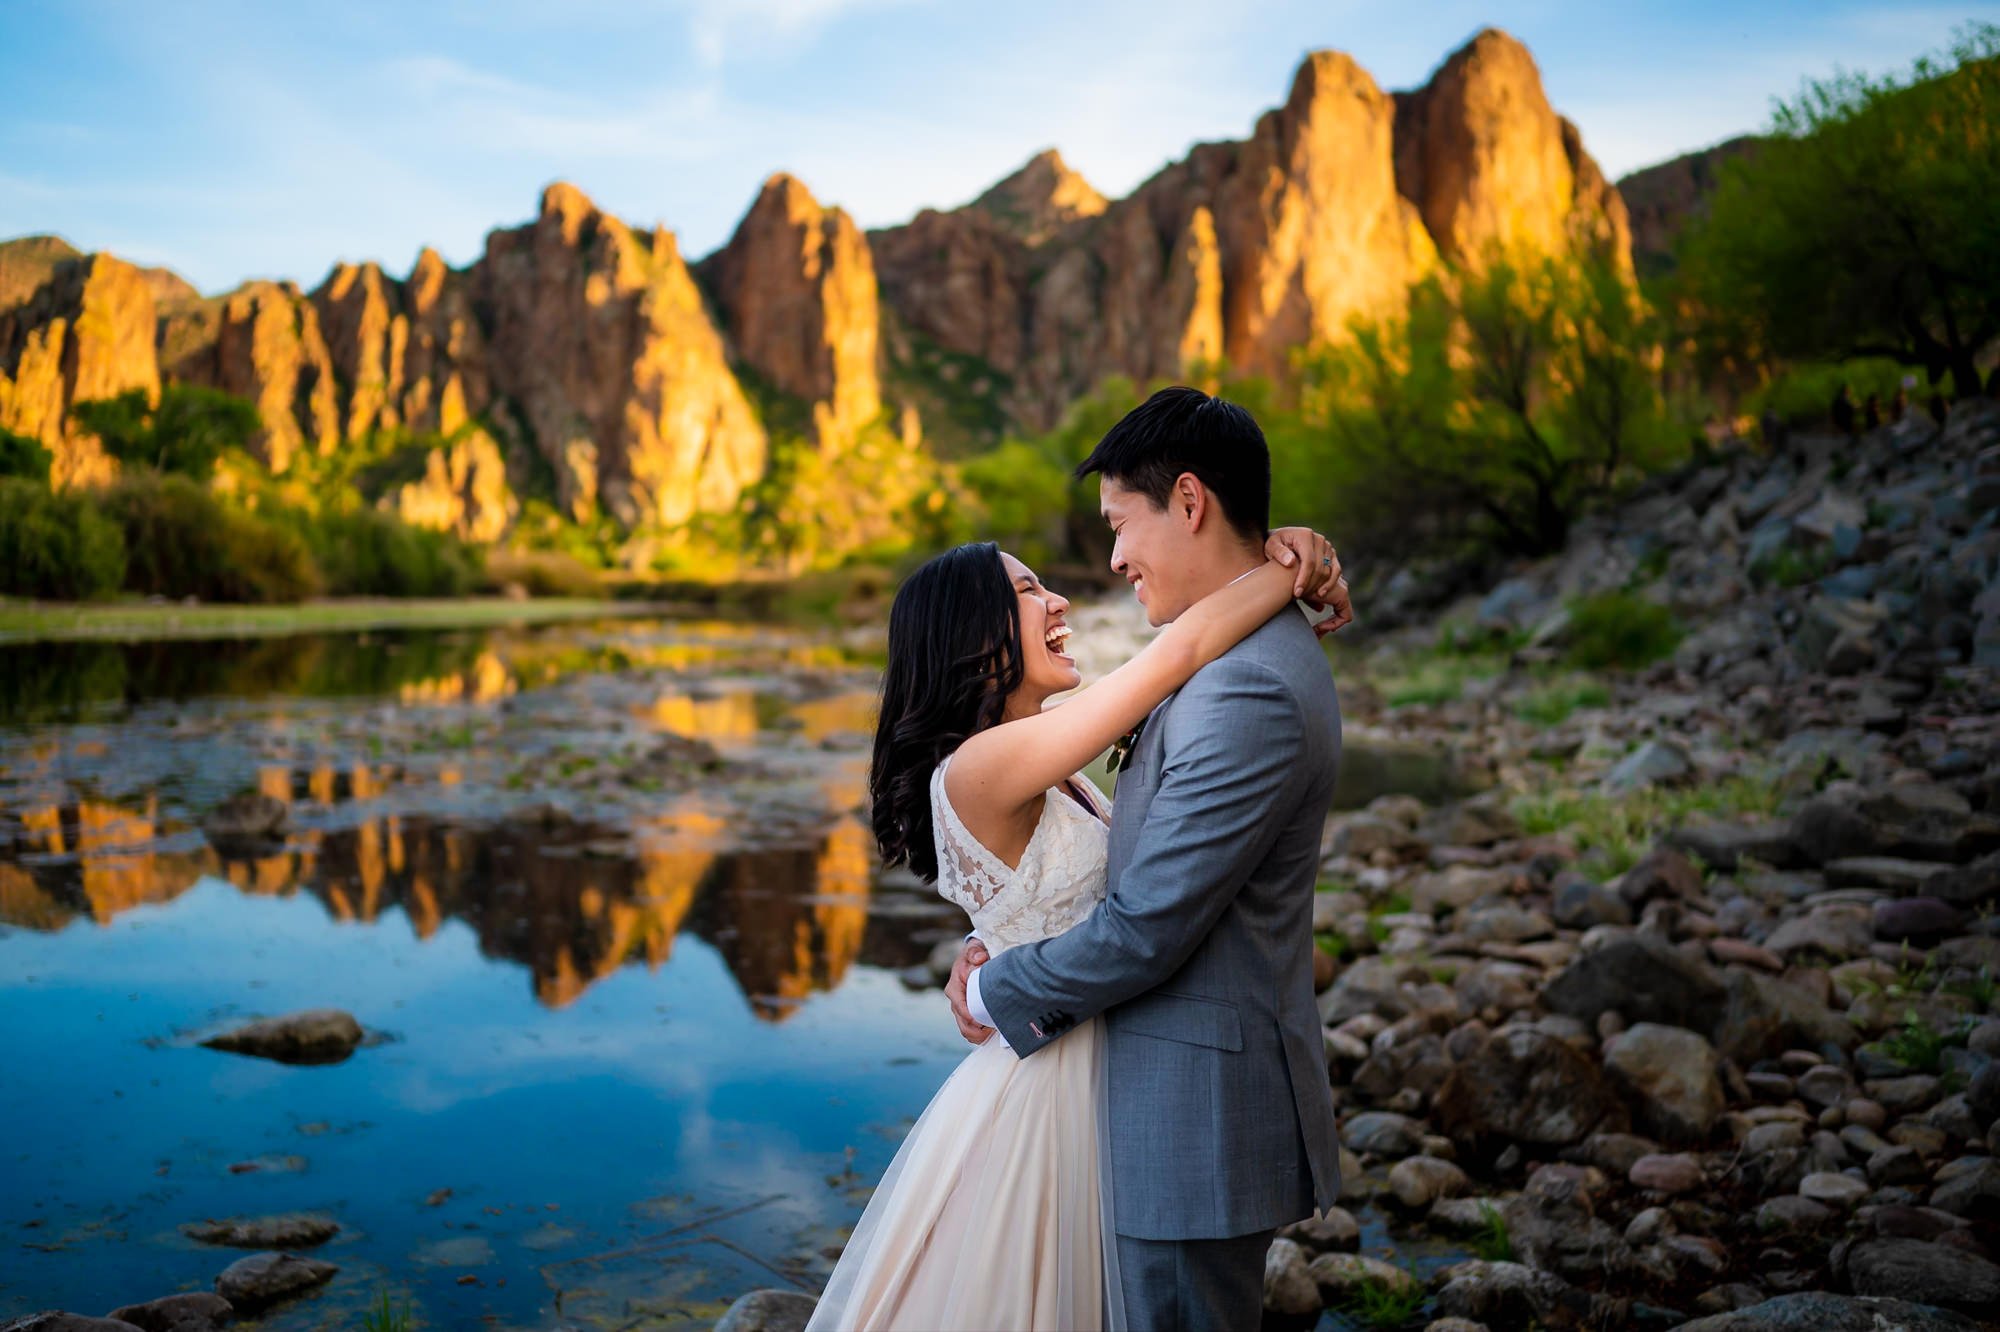 Saguaro Lake Guest Ranch The Perfect Location for a Laid-Back Fun-Filled Wedding. The best documentary wedding photographer Mantas Kubilinskas-40.jpg